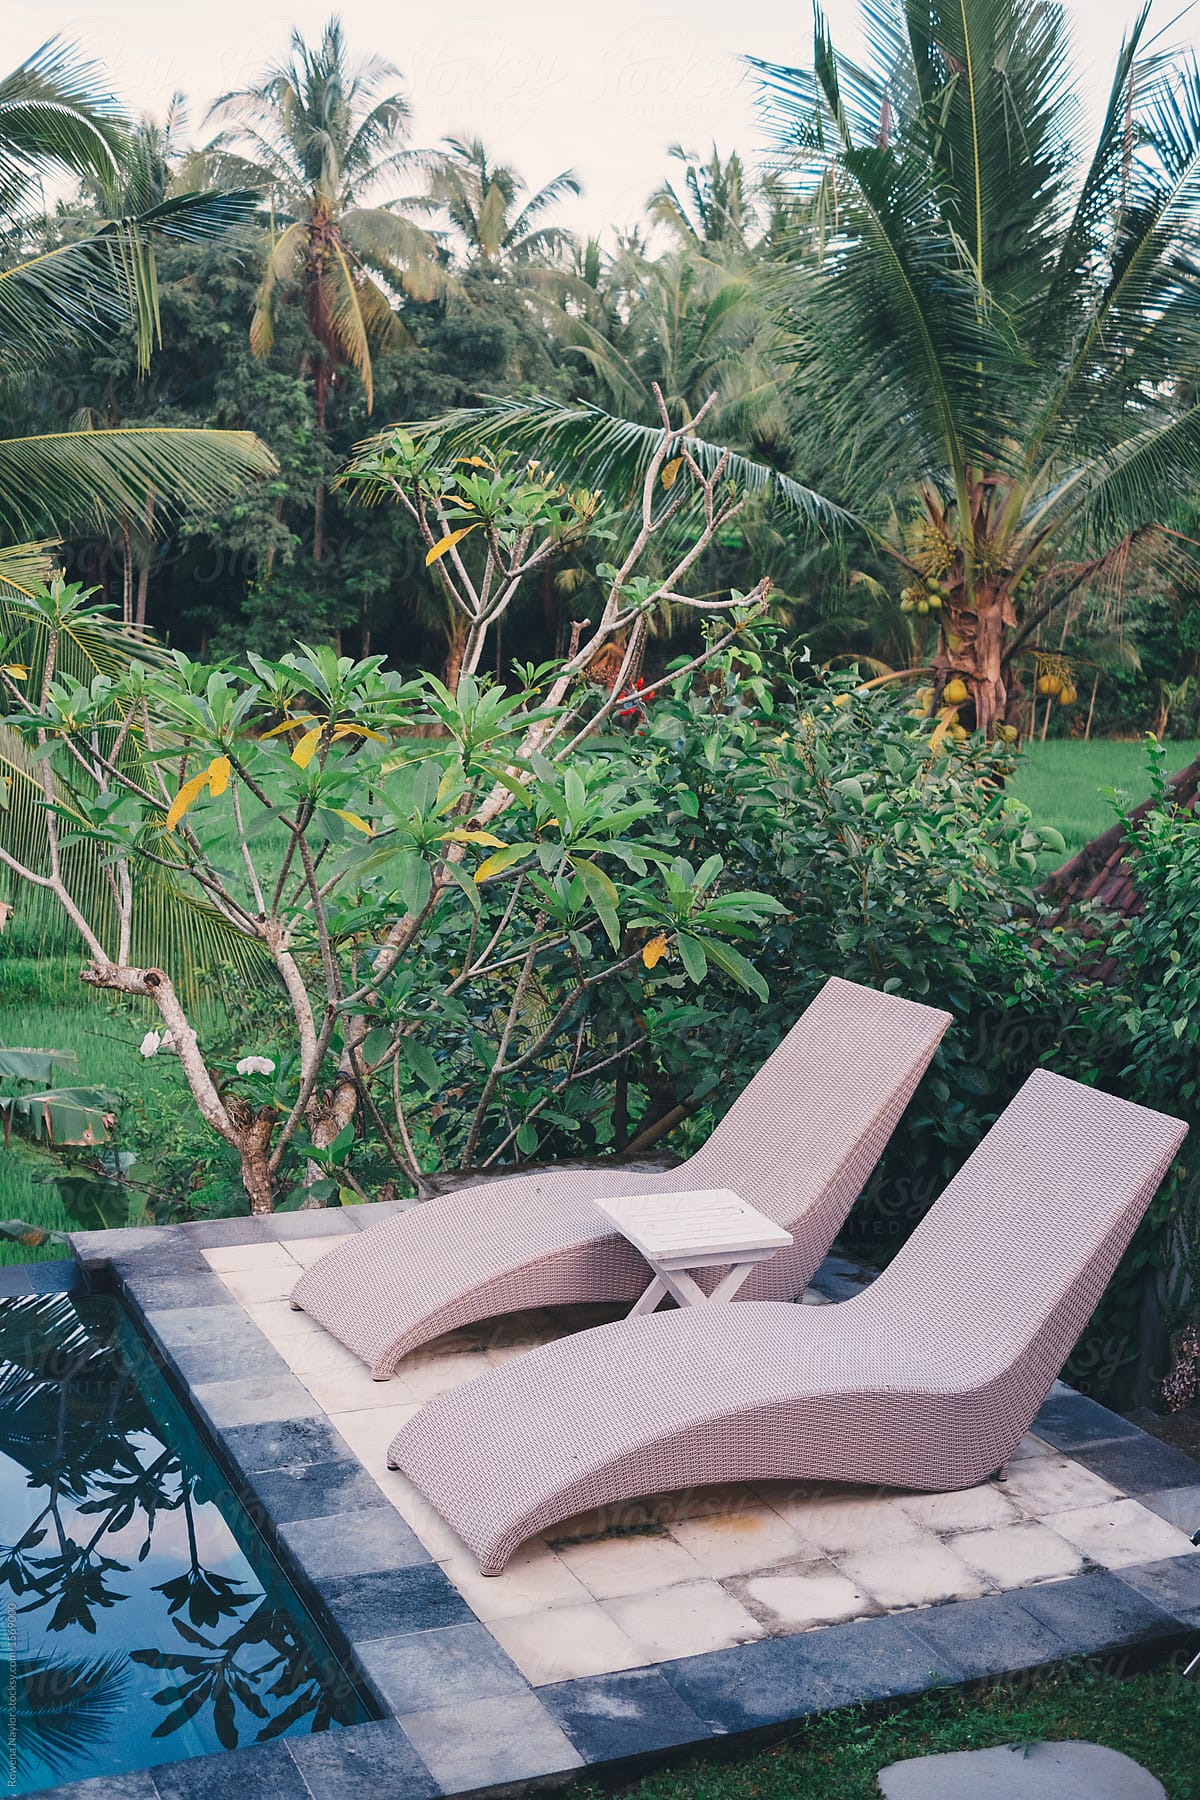 Two pool loungers next to pool set in tropical garden